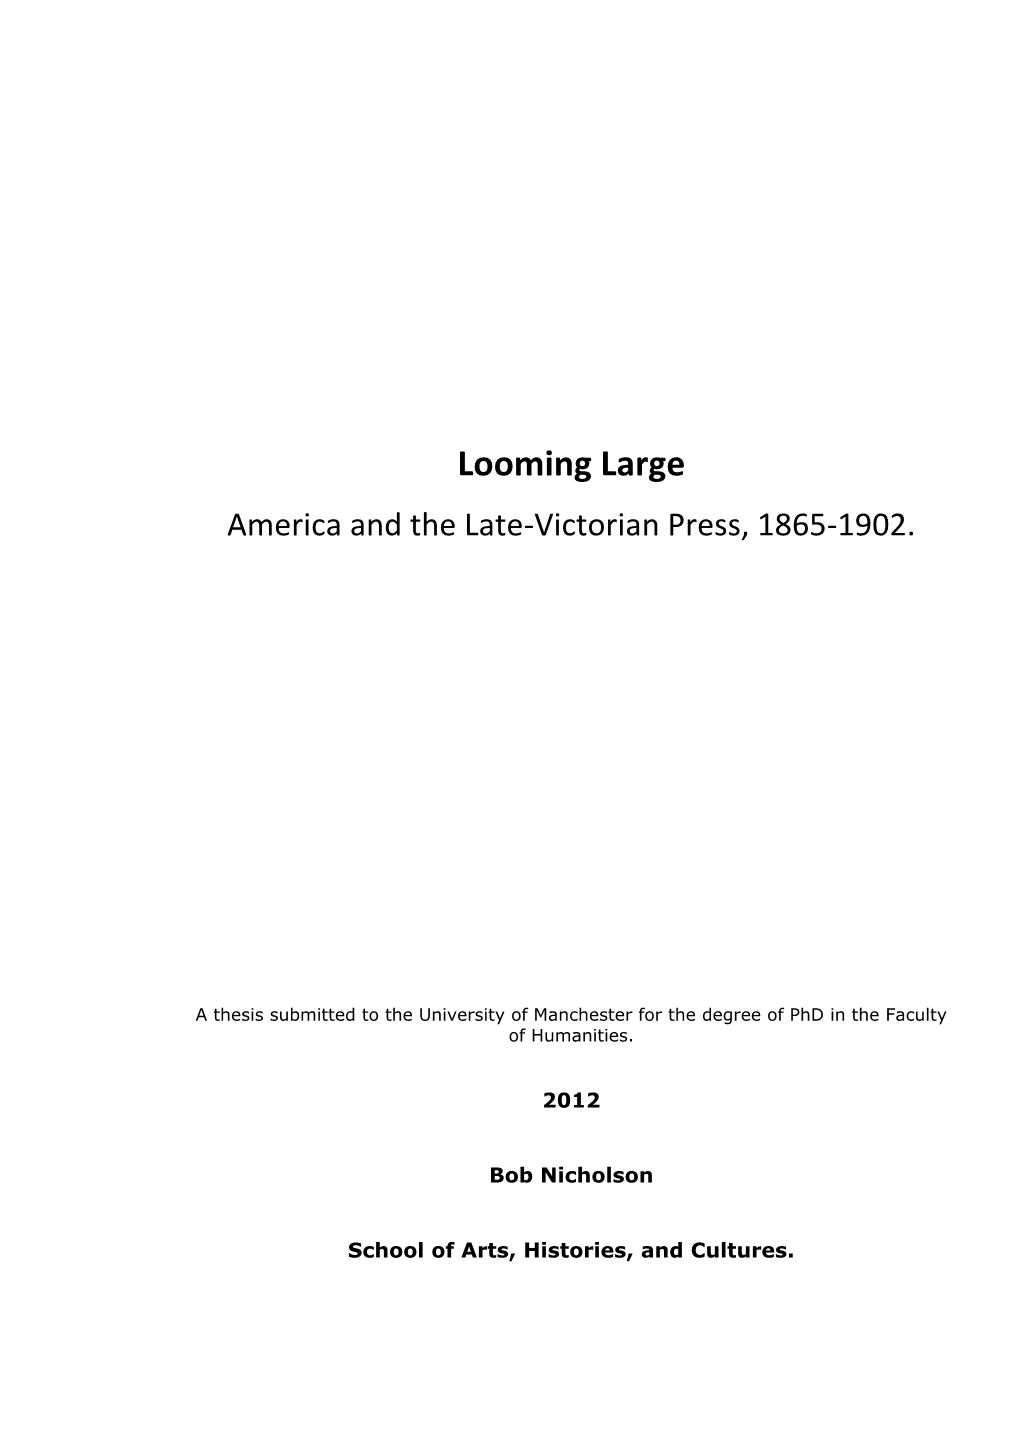 Looming Large America and the Late-Victorian Press, 1865-1902